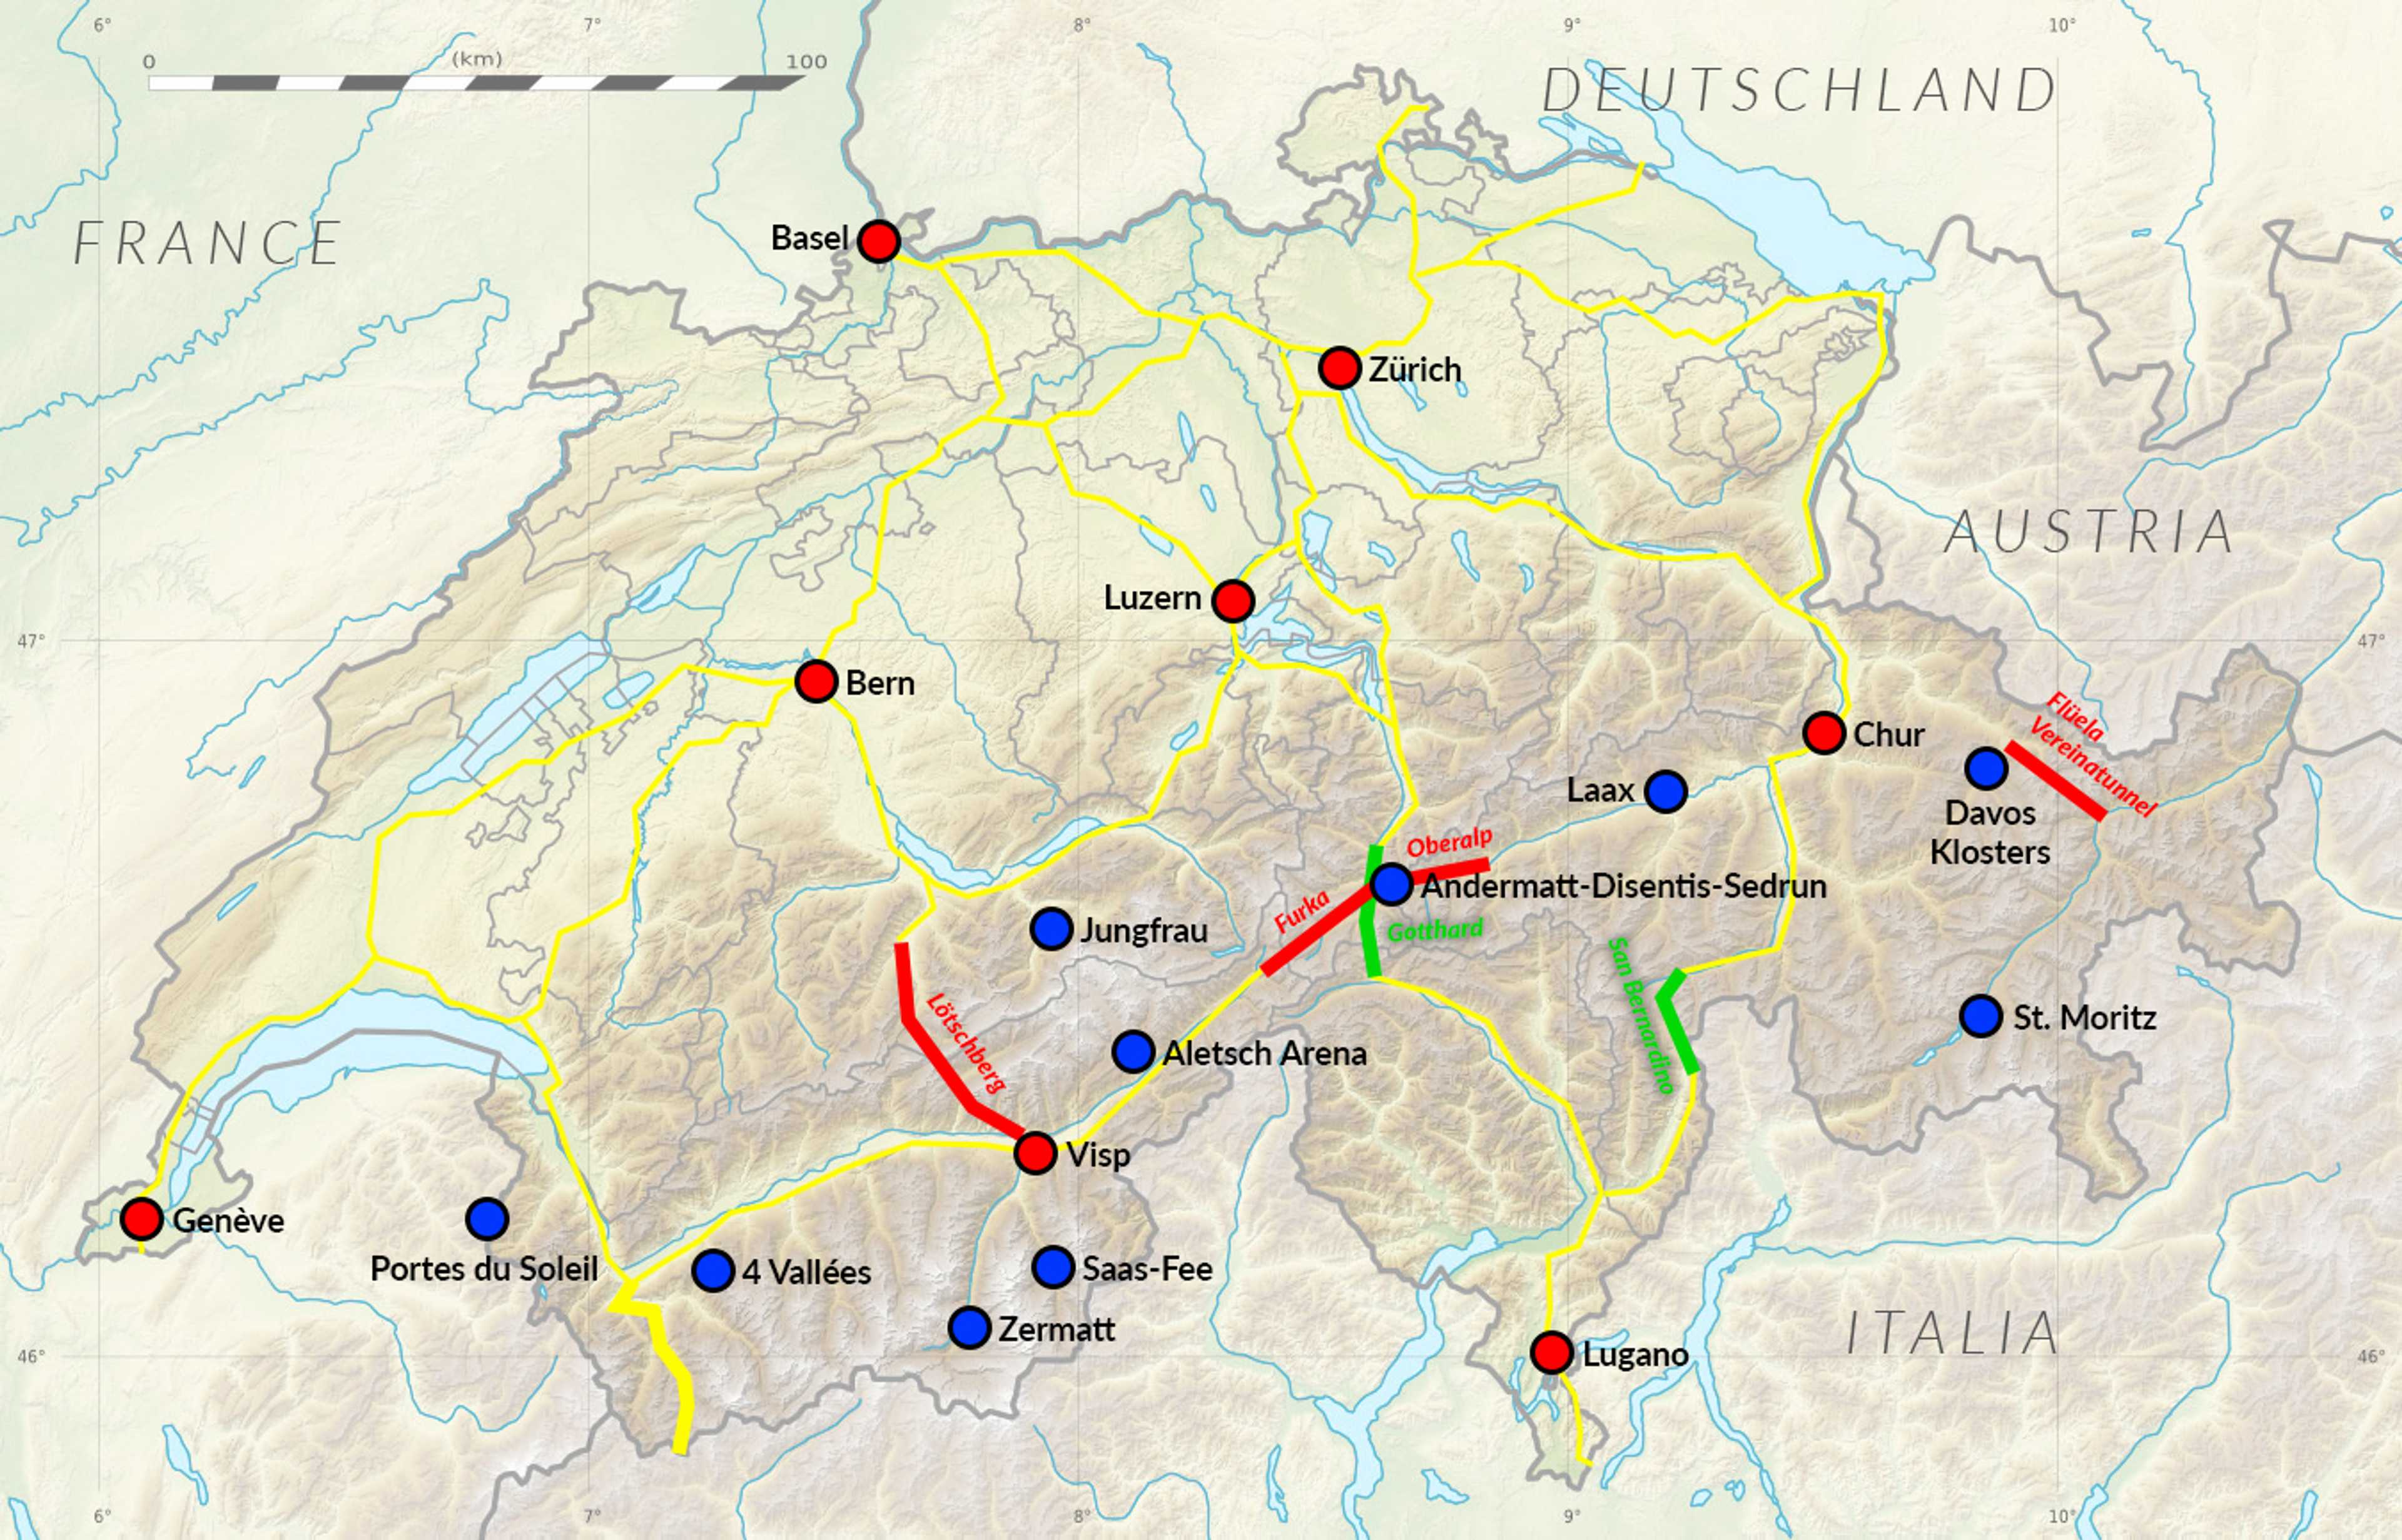 Indicative map of main roads (yellow), road tunnels (green) and train shuttles (red) in Switzerland